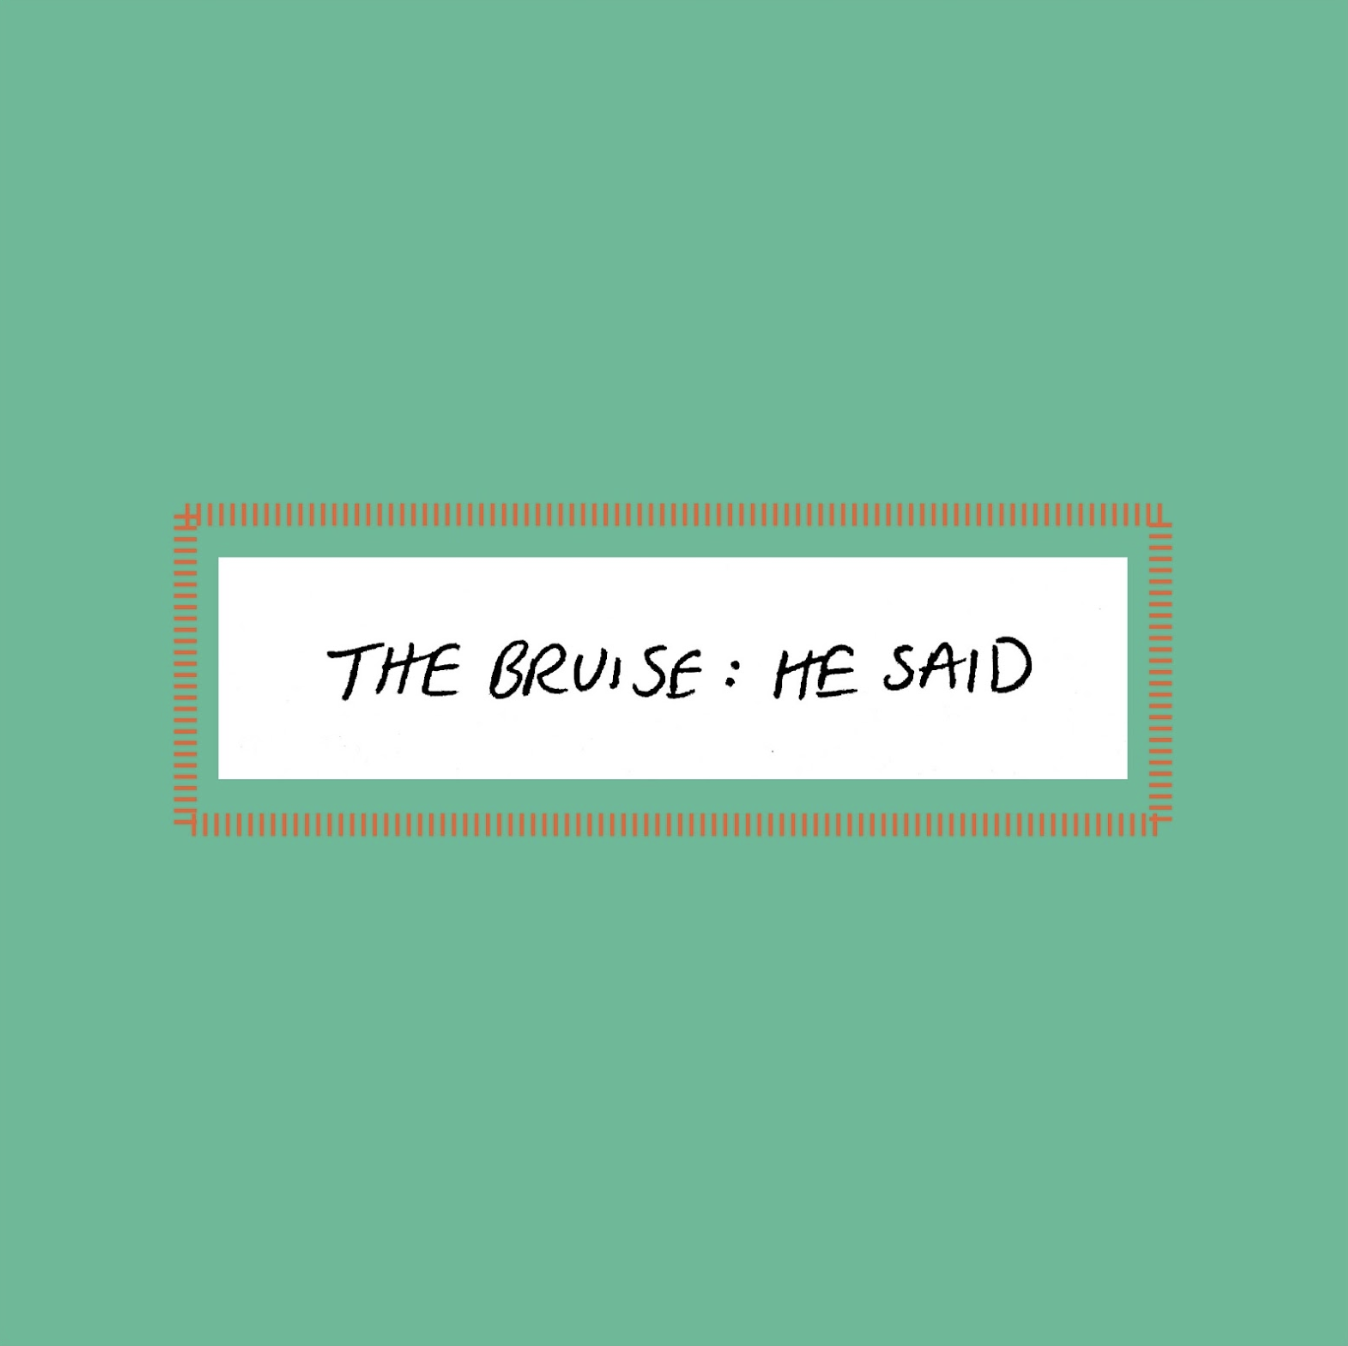 The Bruise: He said by Emilie Unterweger